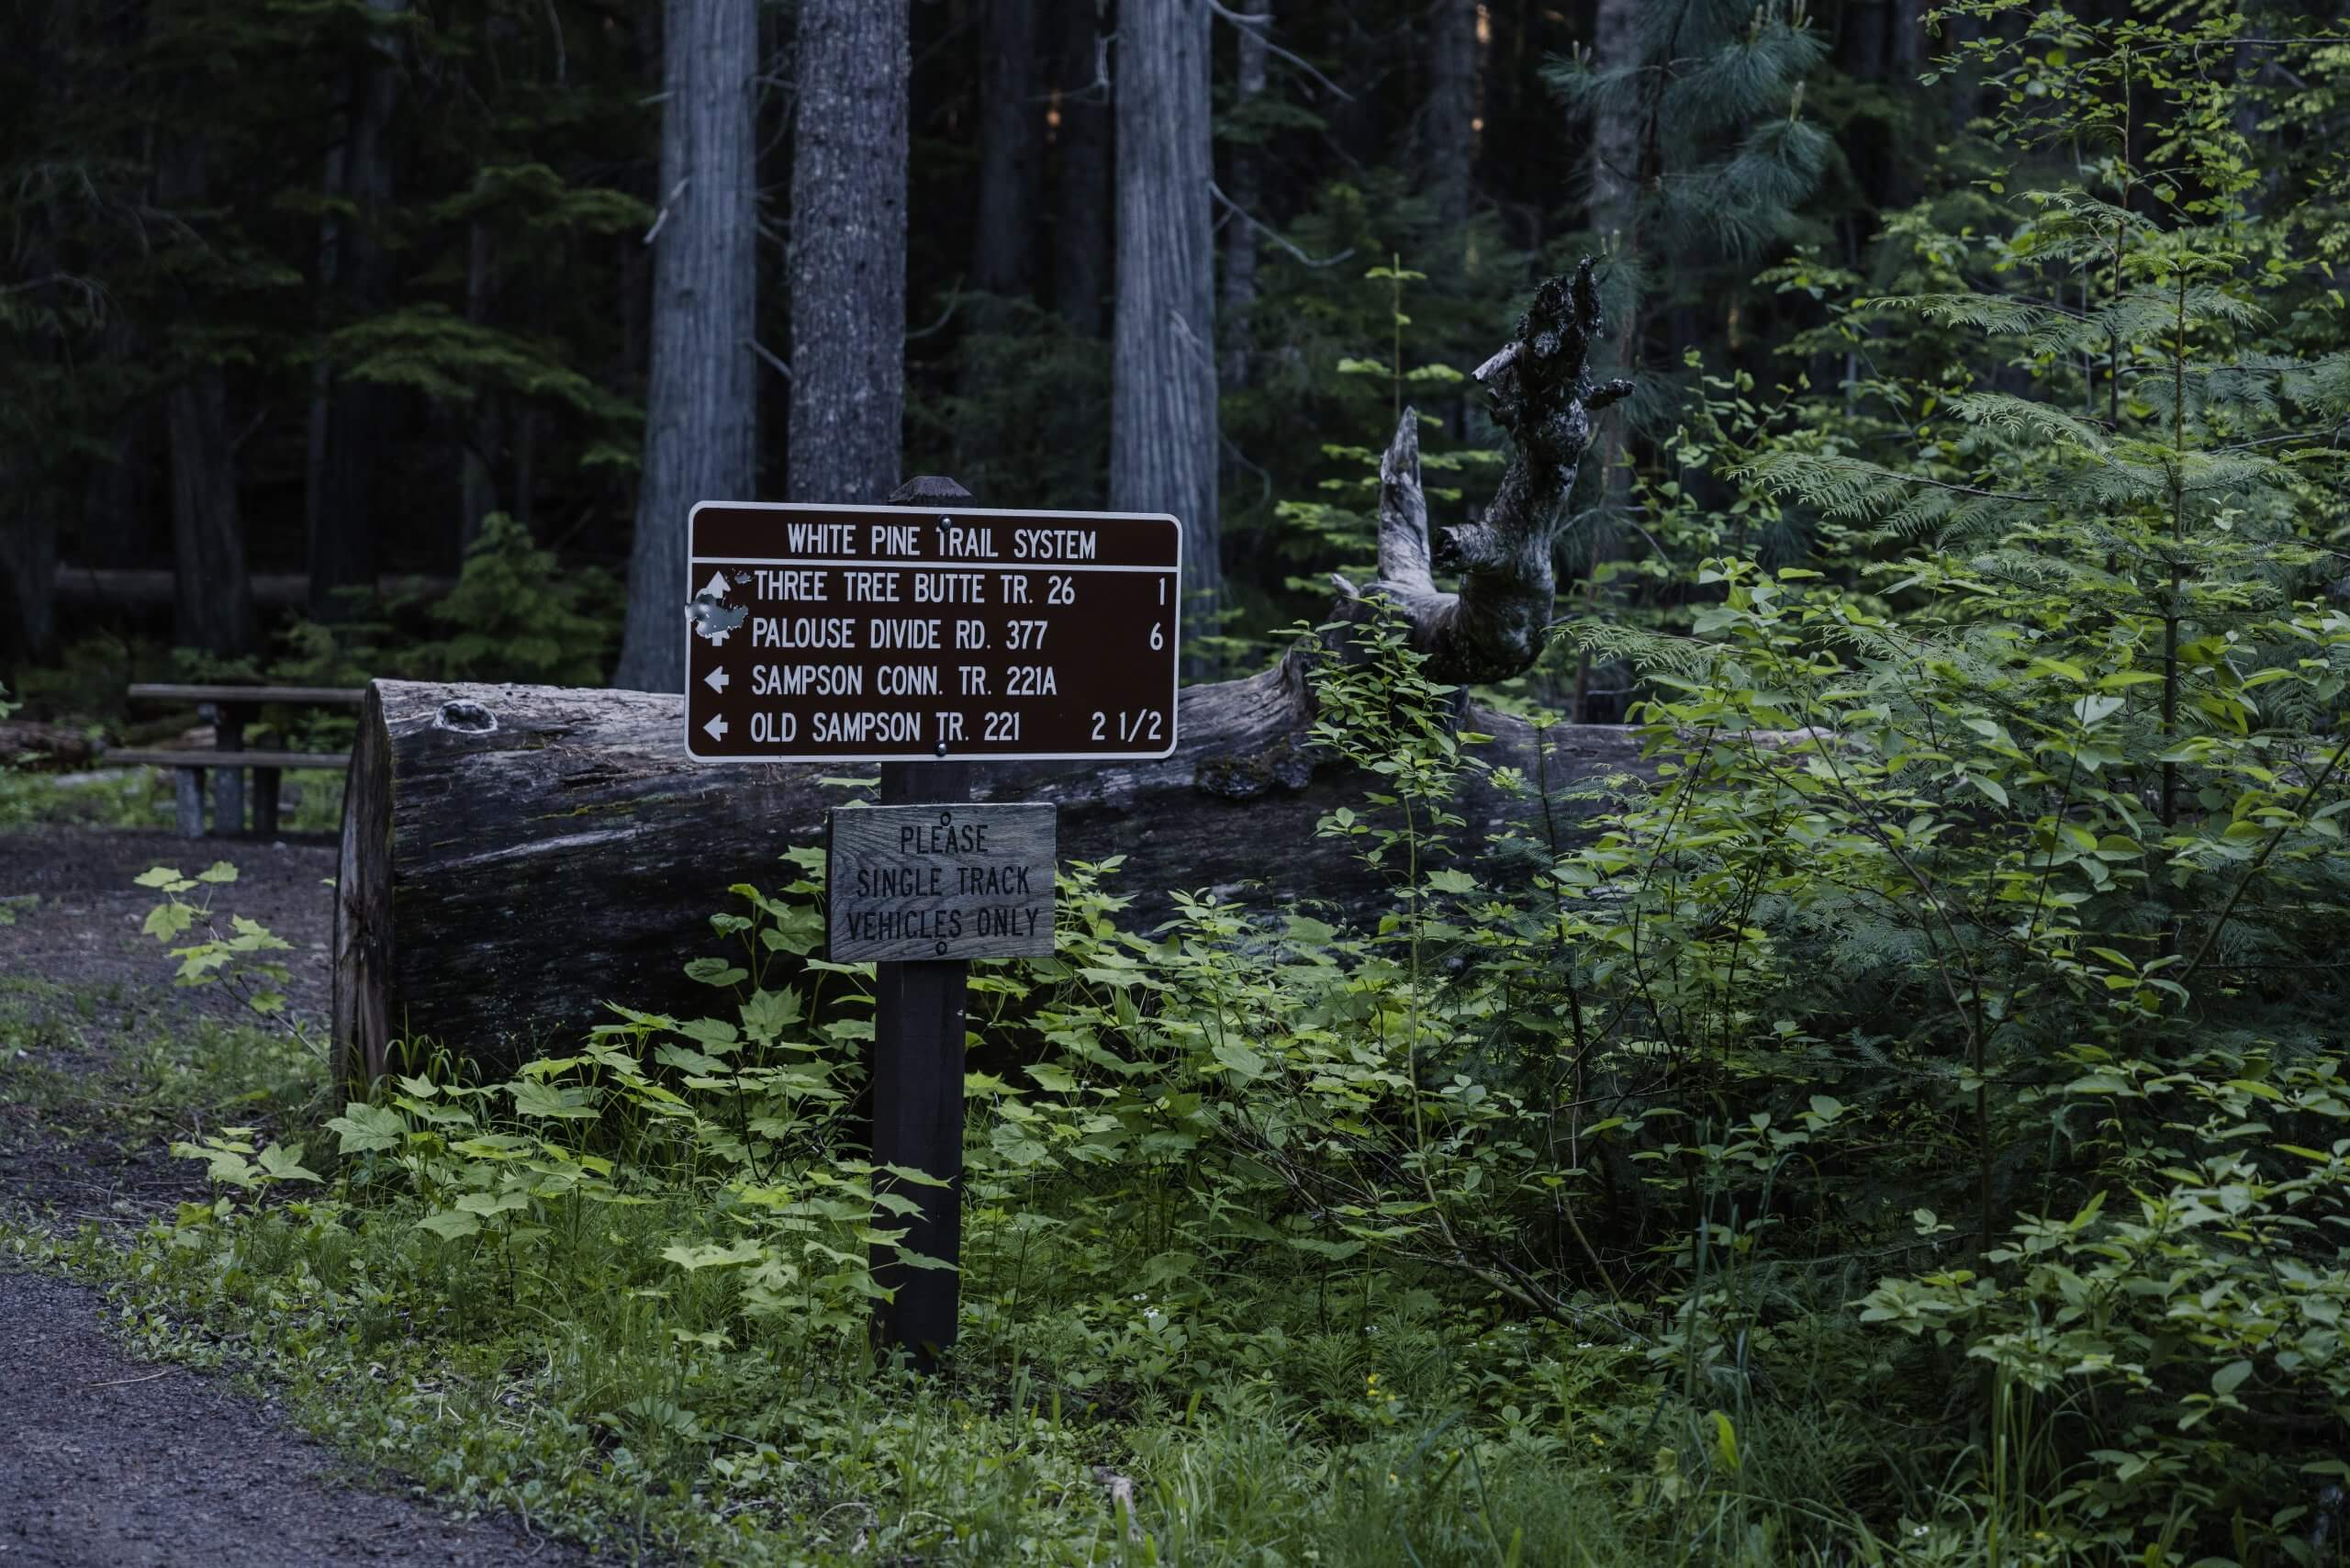 A forest sign showing directions in the Great White Pine Campground.